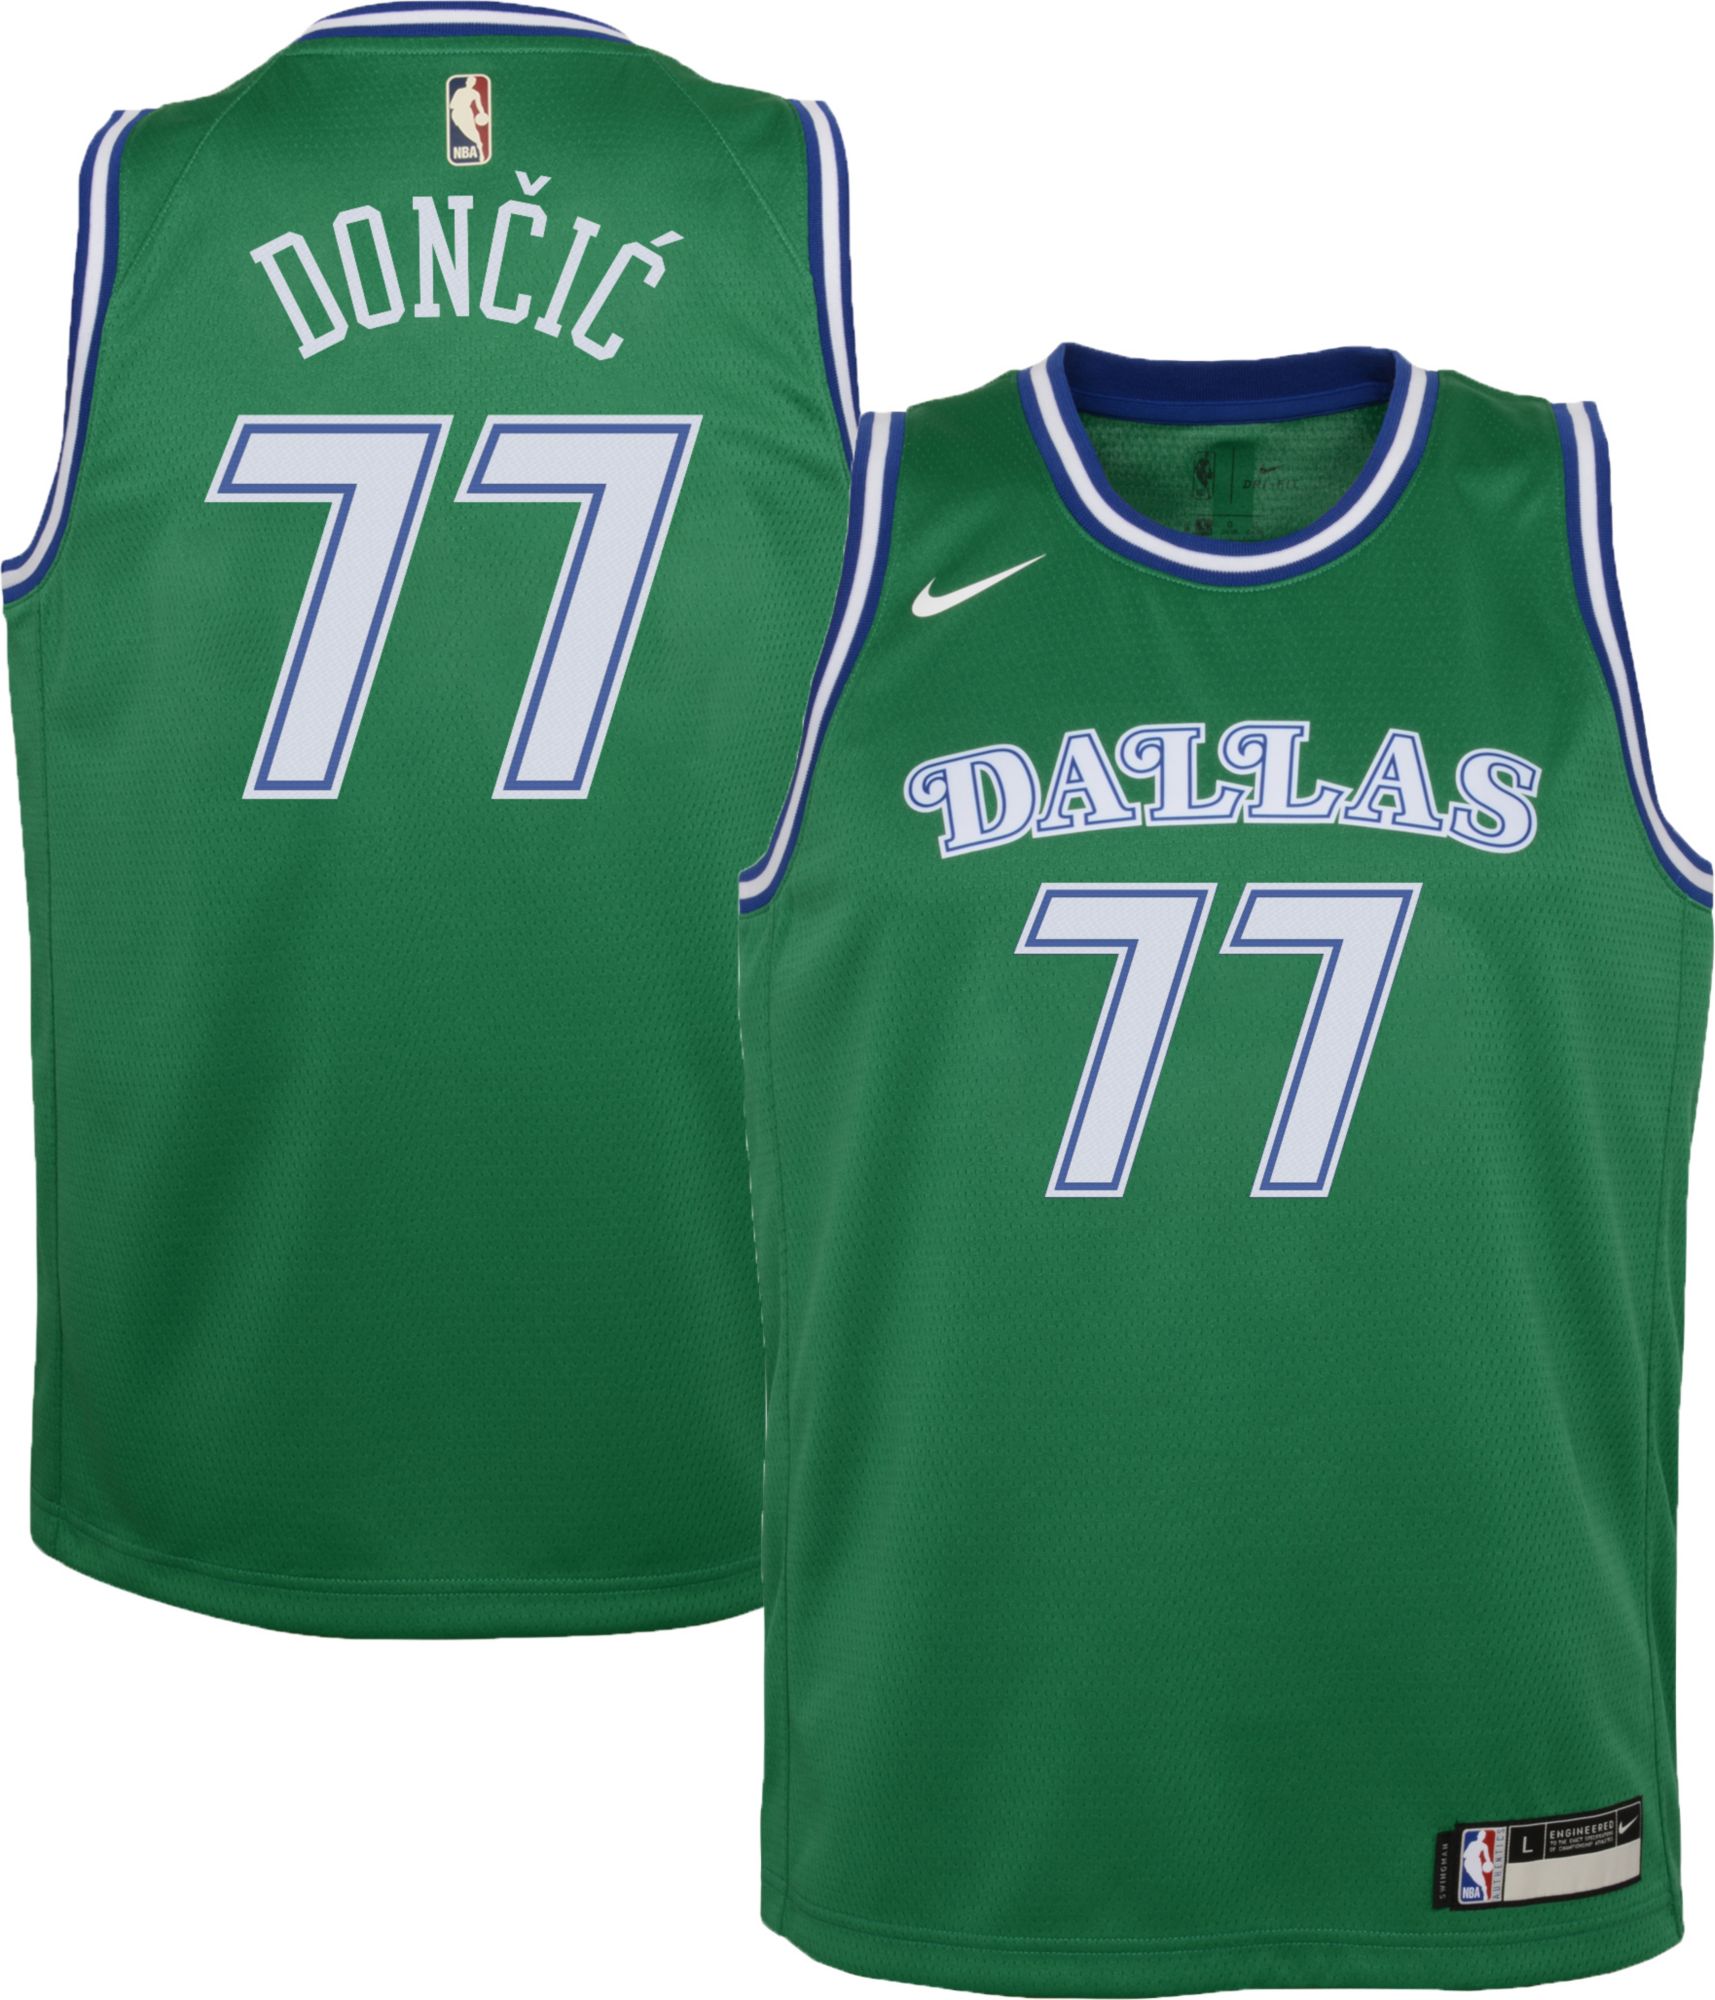 Authentic Nike NBA Luka Doncic Jersey, Men's Fashion, Activewear